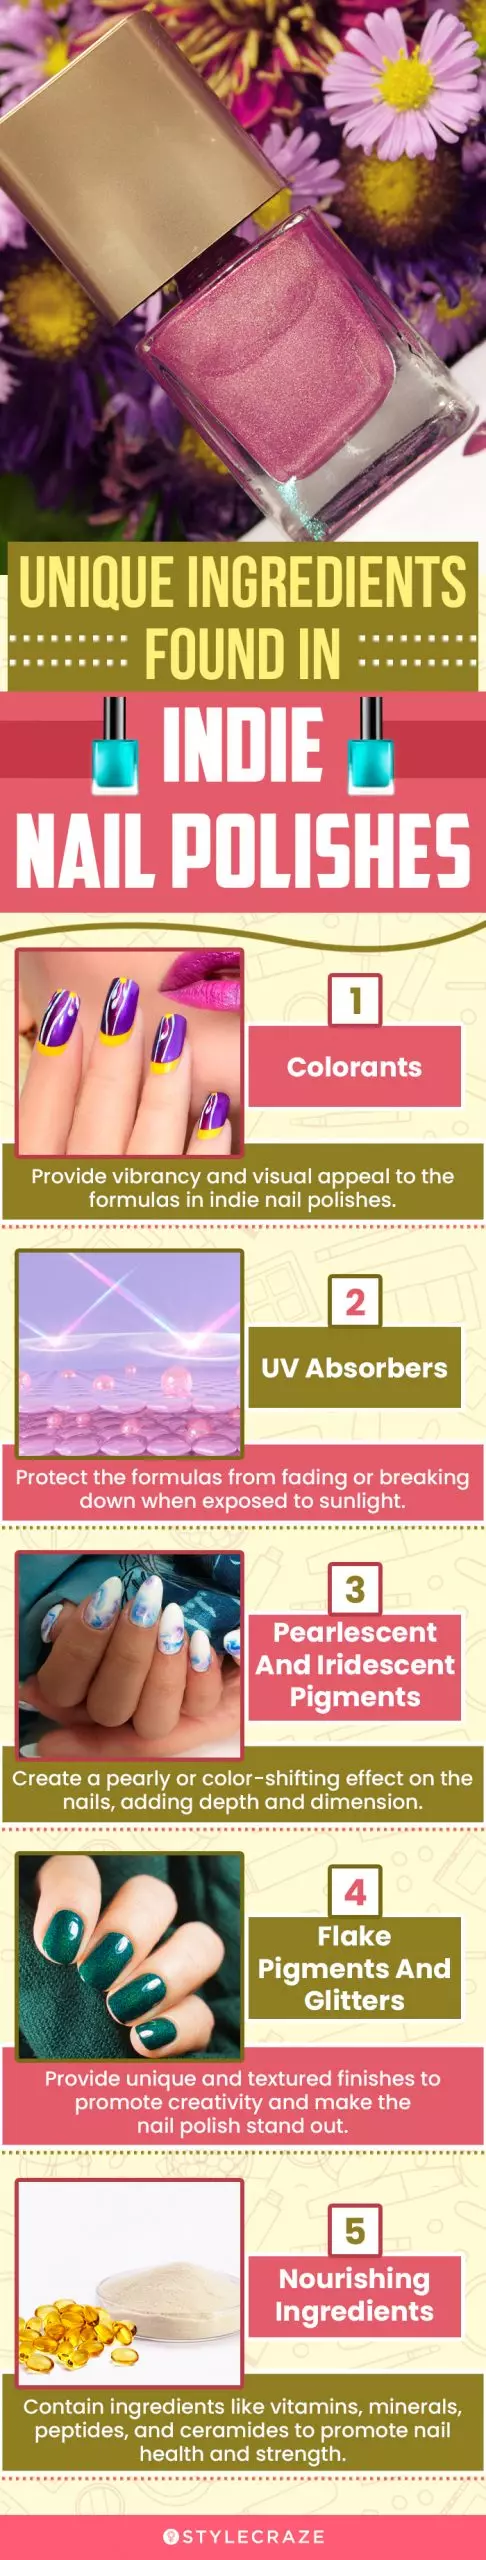 Unique Ingredients Found In Indie Nail Polishes (infographic)